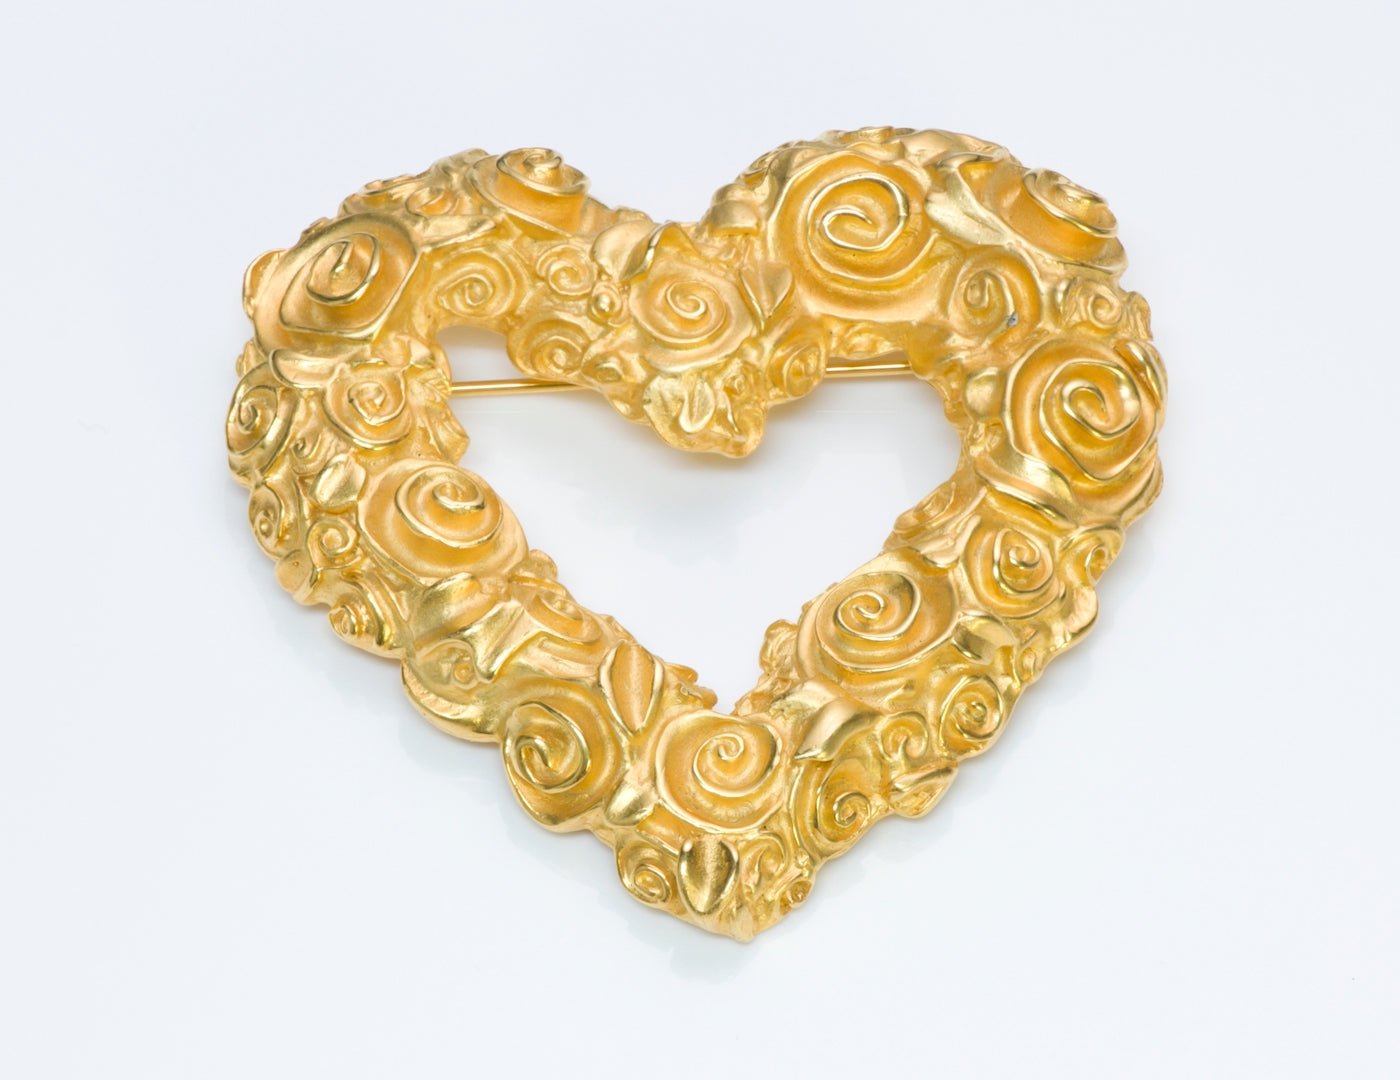 Givenchy Paris Gold Plated Rose Flower Heart Brooch